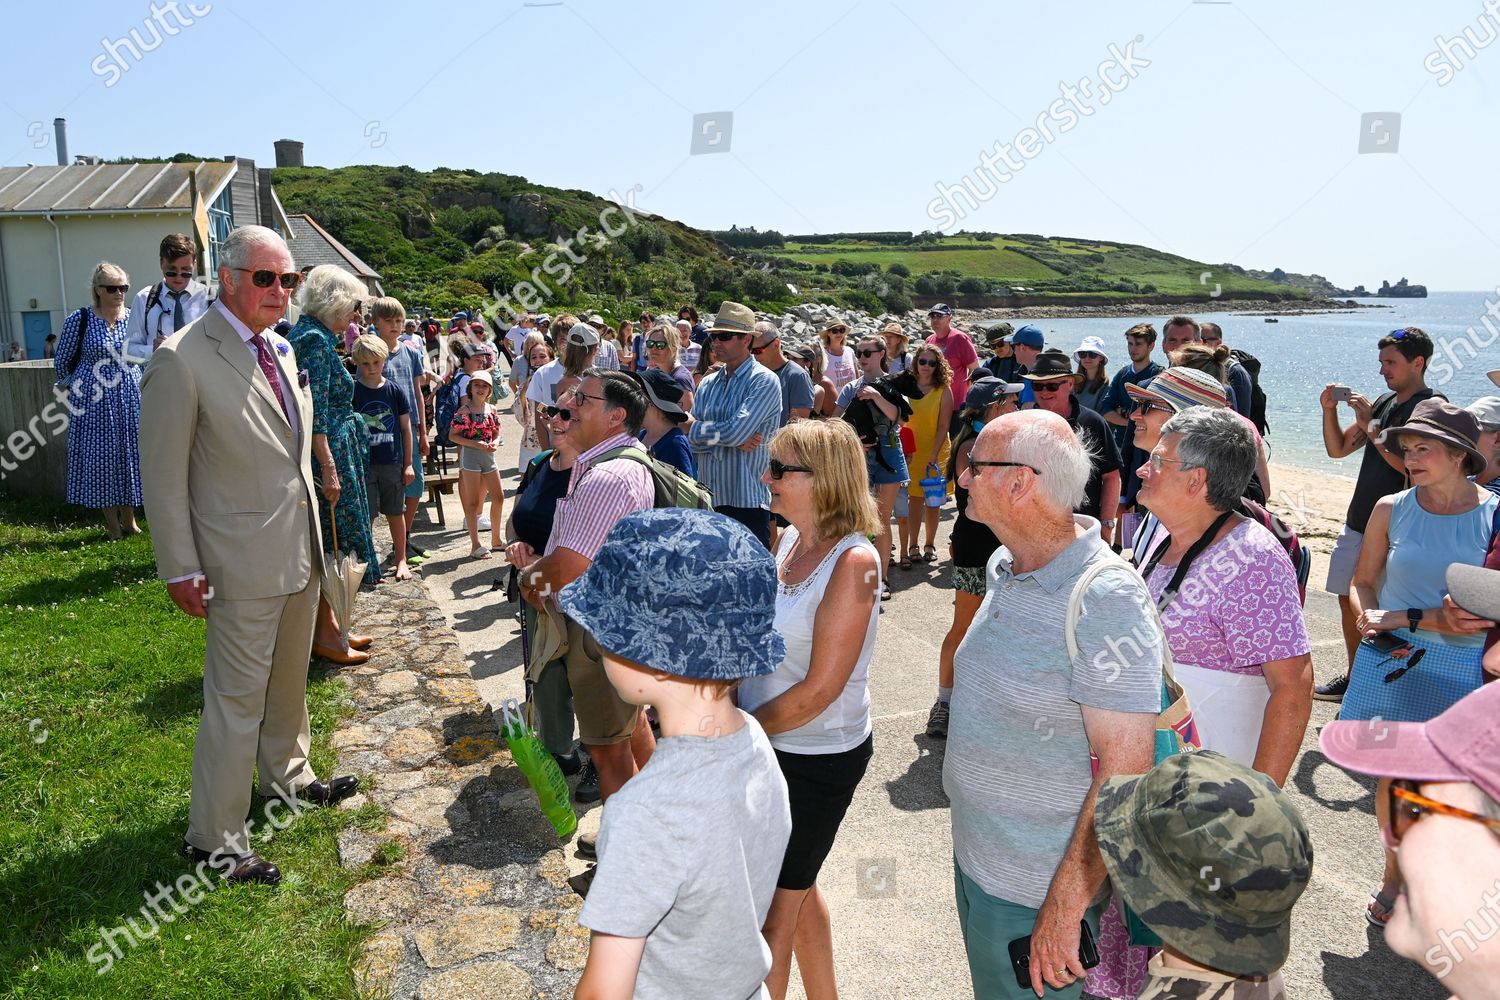 prince-charles-and-camilla-duchess-of-cornwall-visit-to-devon-and-cornwall-day-2-uk-shutterstock-editorial-12222608au.jpg